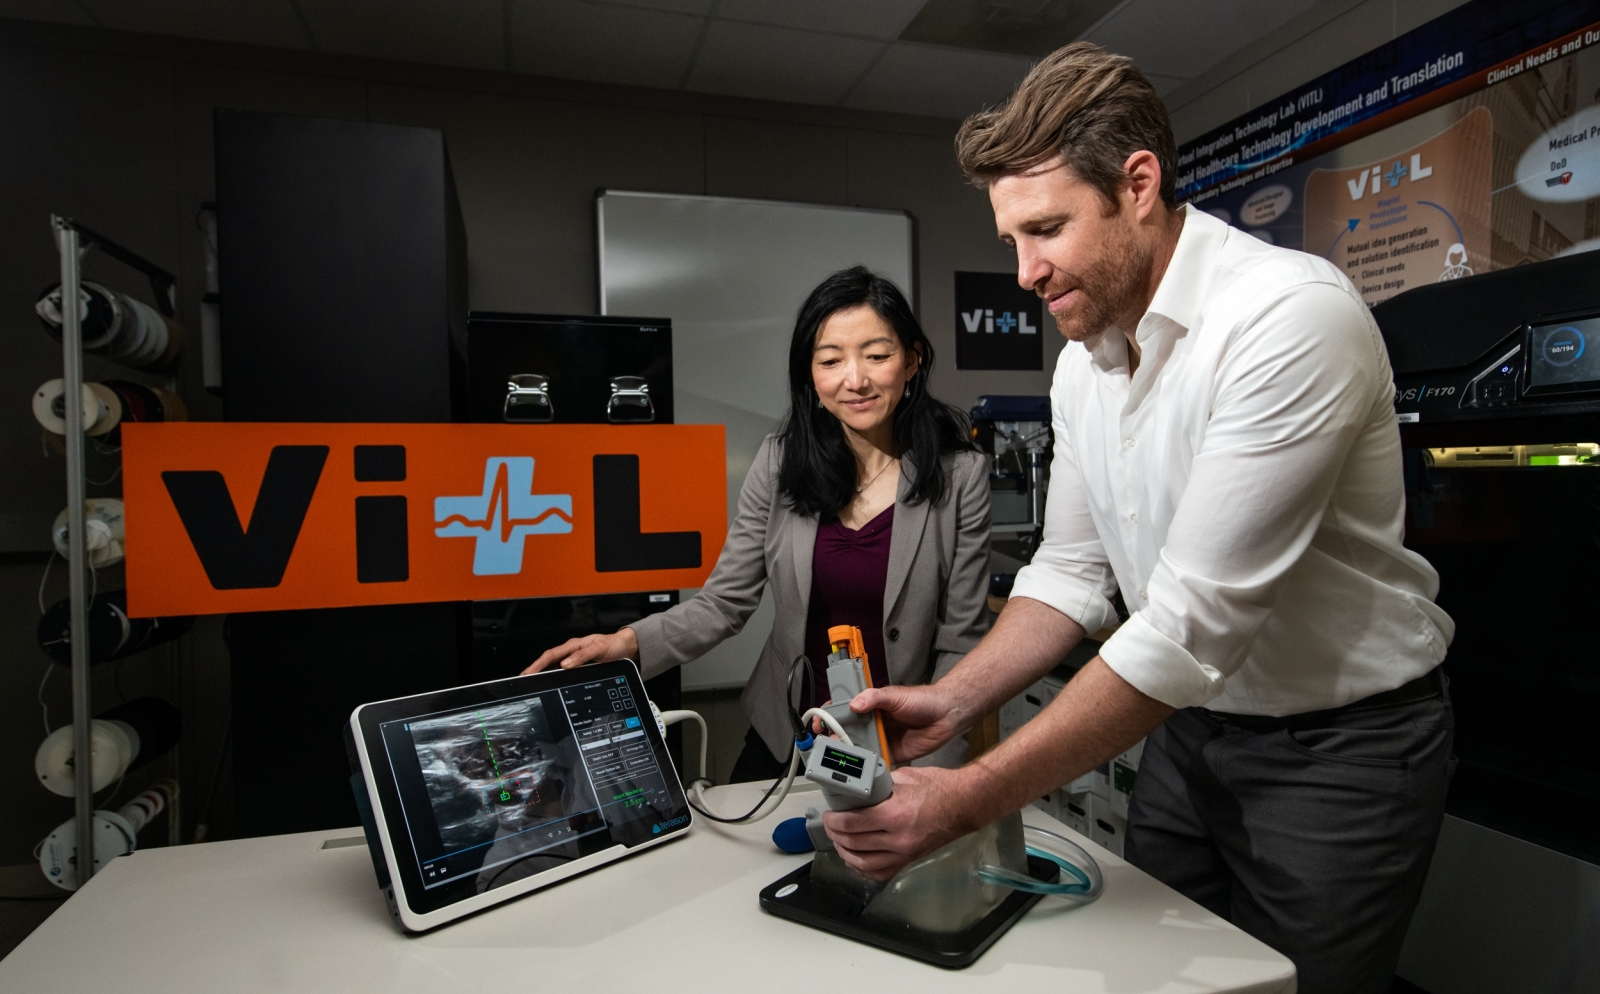 Research team members Matt Johnson and Laura Brattain test their new medical device on an artificial model of human tissue and blood vessels.